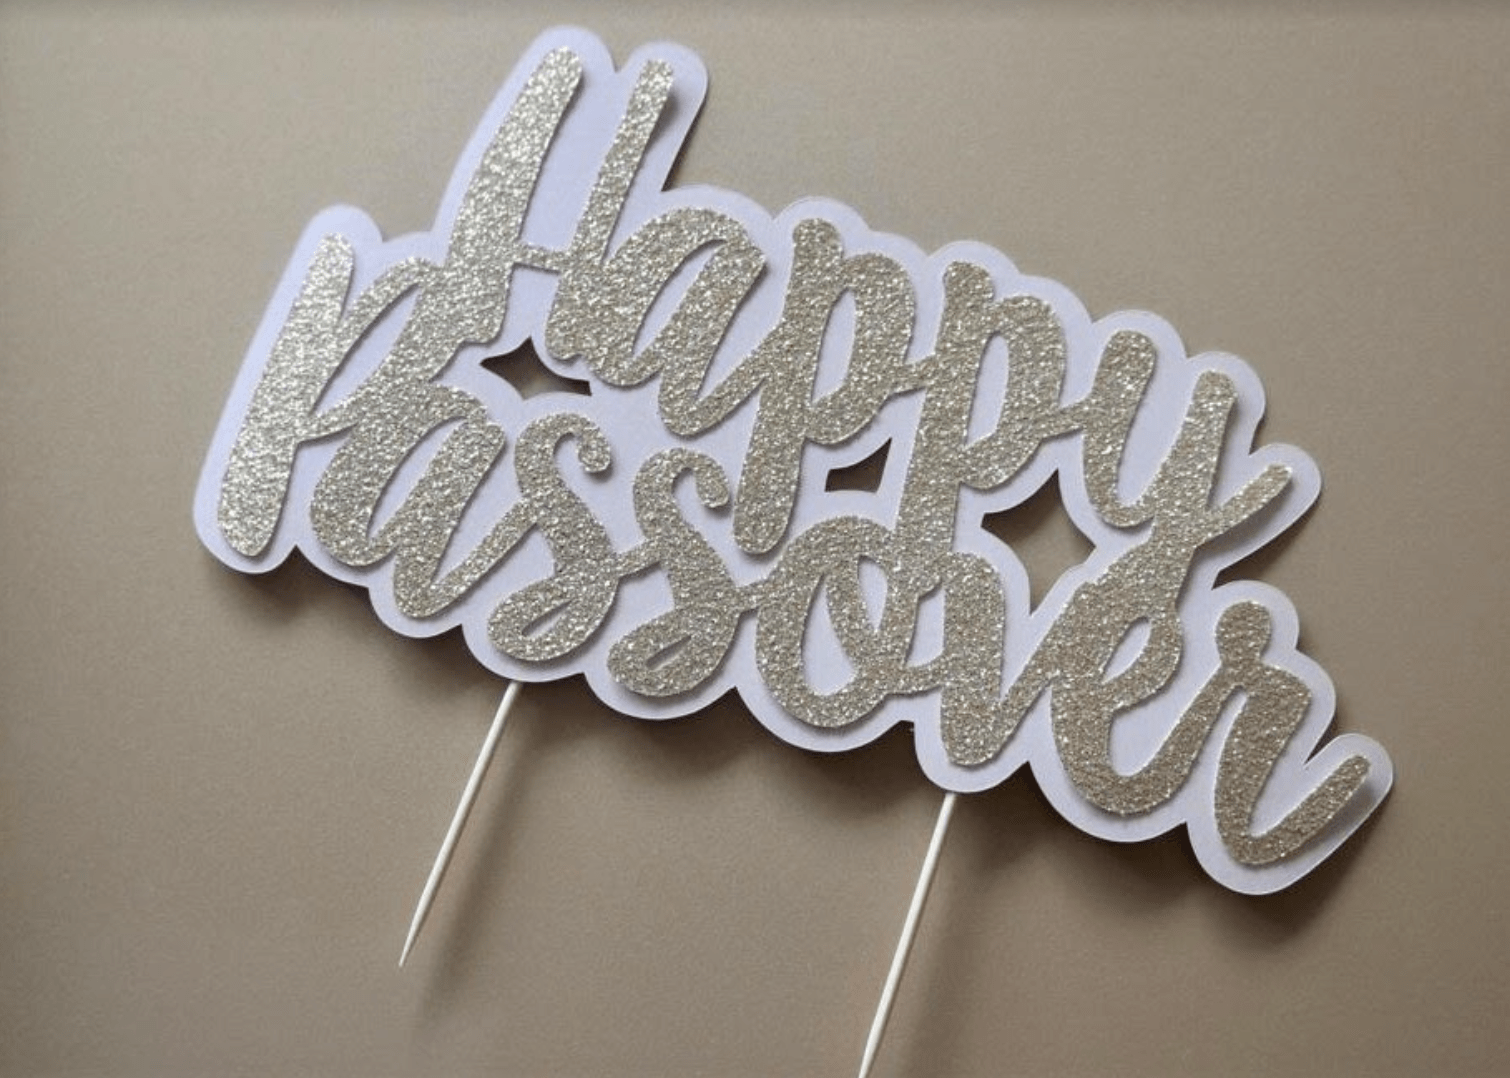 The KitCut Decorations Happy Passover Cake Topper